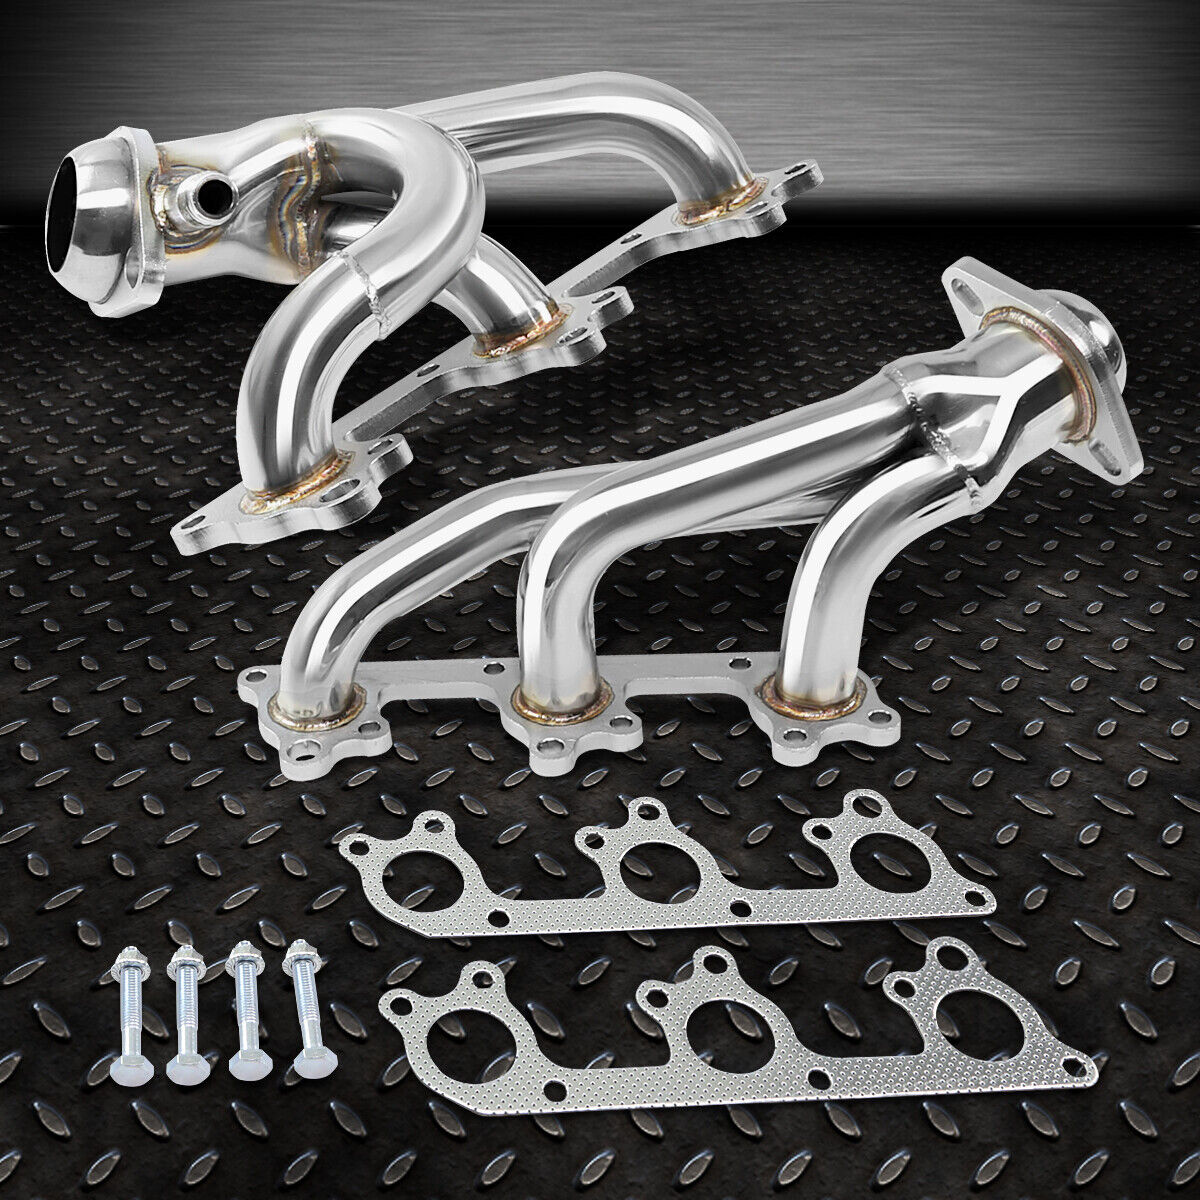 FOR 05-10 MUSTANG 4.0/COLOGNE V6 STAINLESS EXHAUST MANIFOLD HEADER+GASKETS/BOLTS